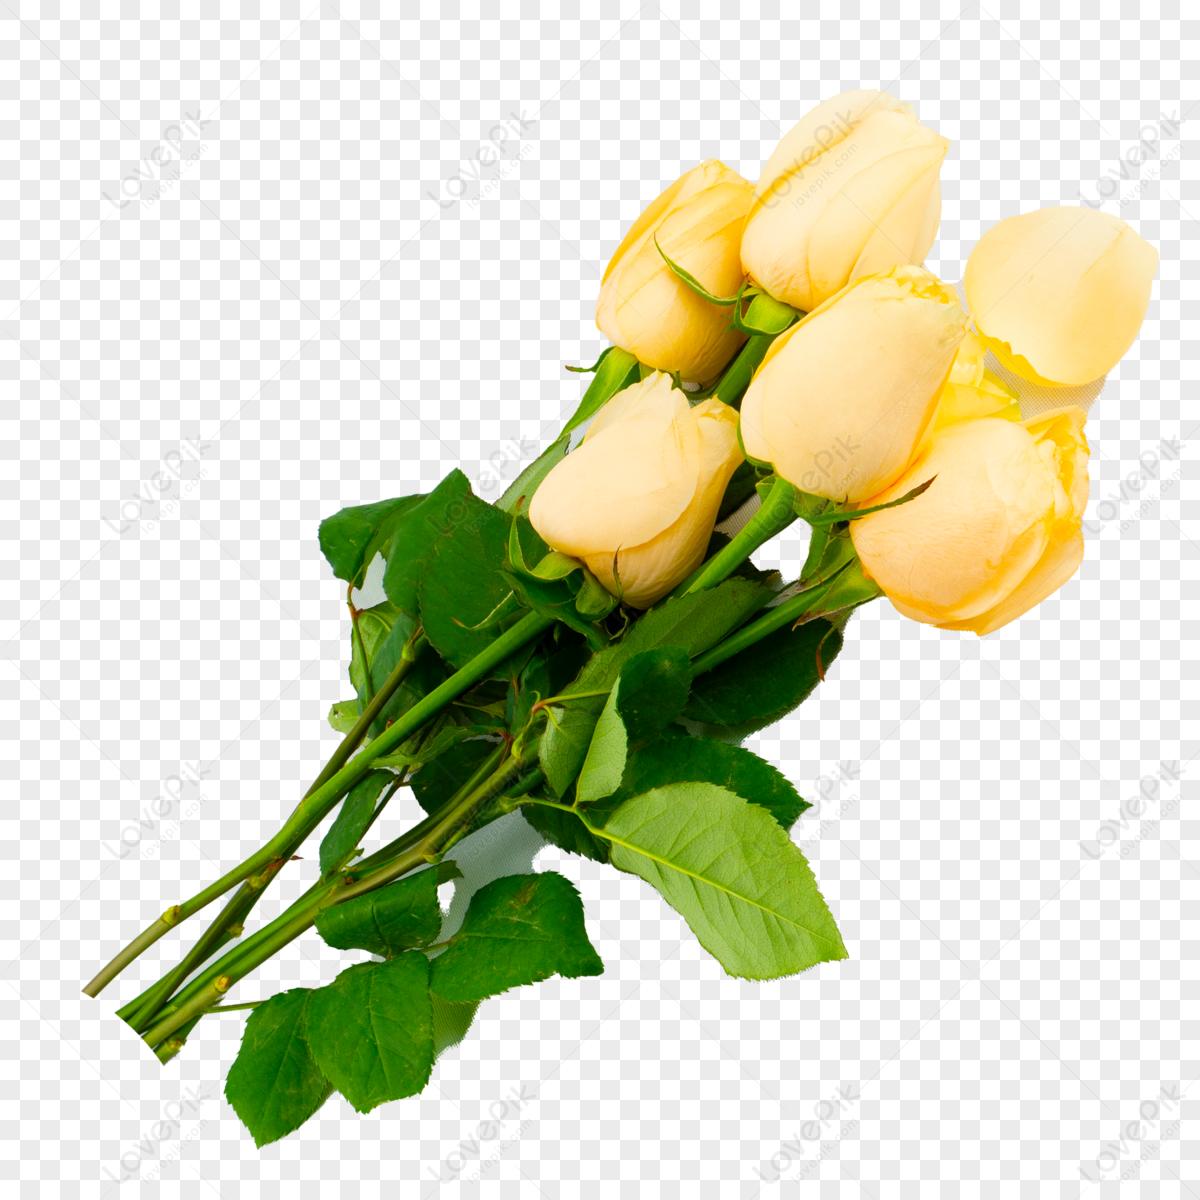 Champagne Flower PNG Images With Transparent Background